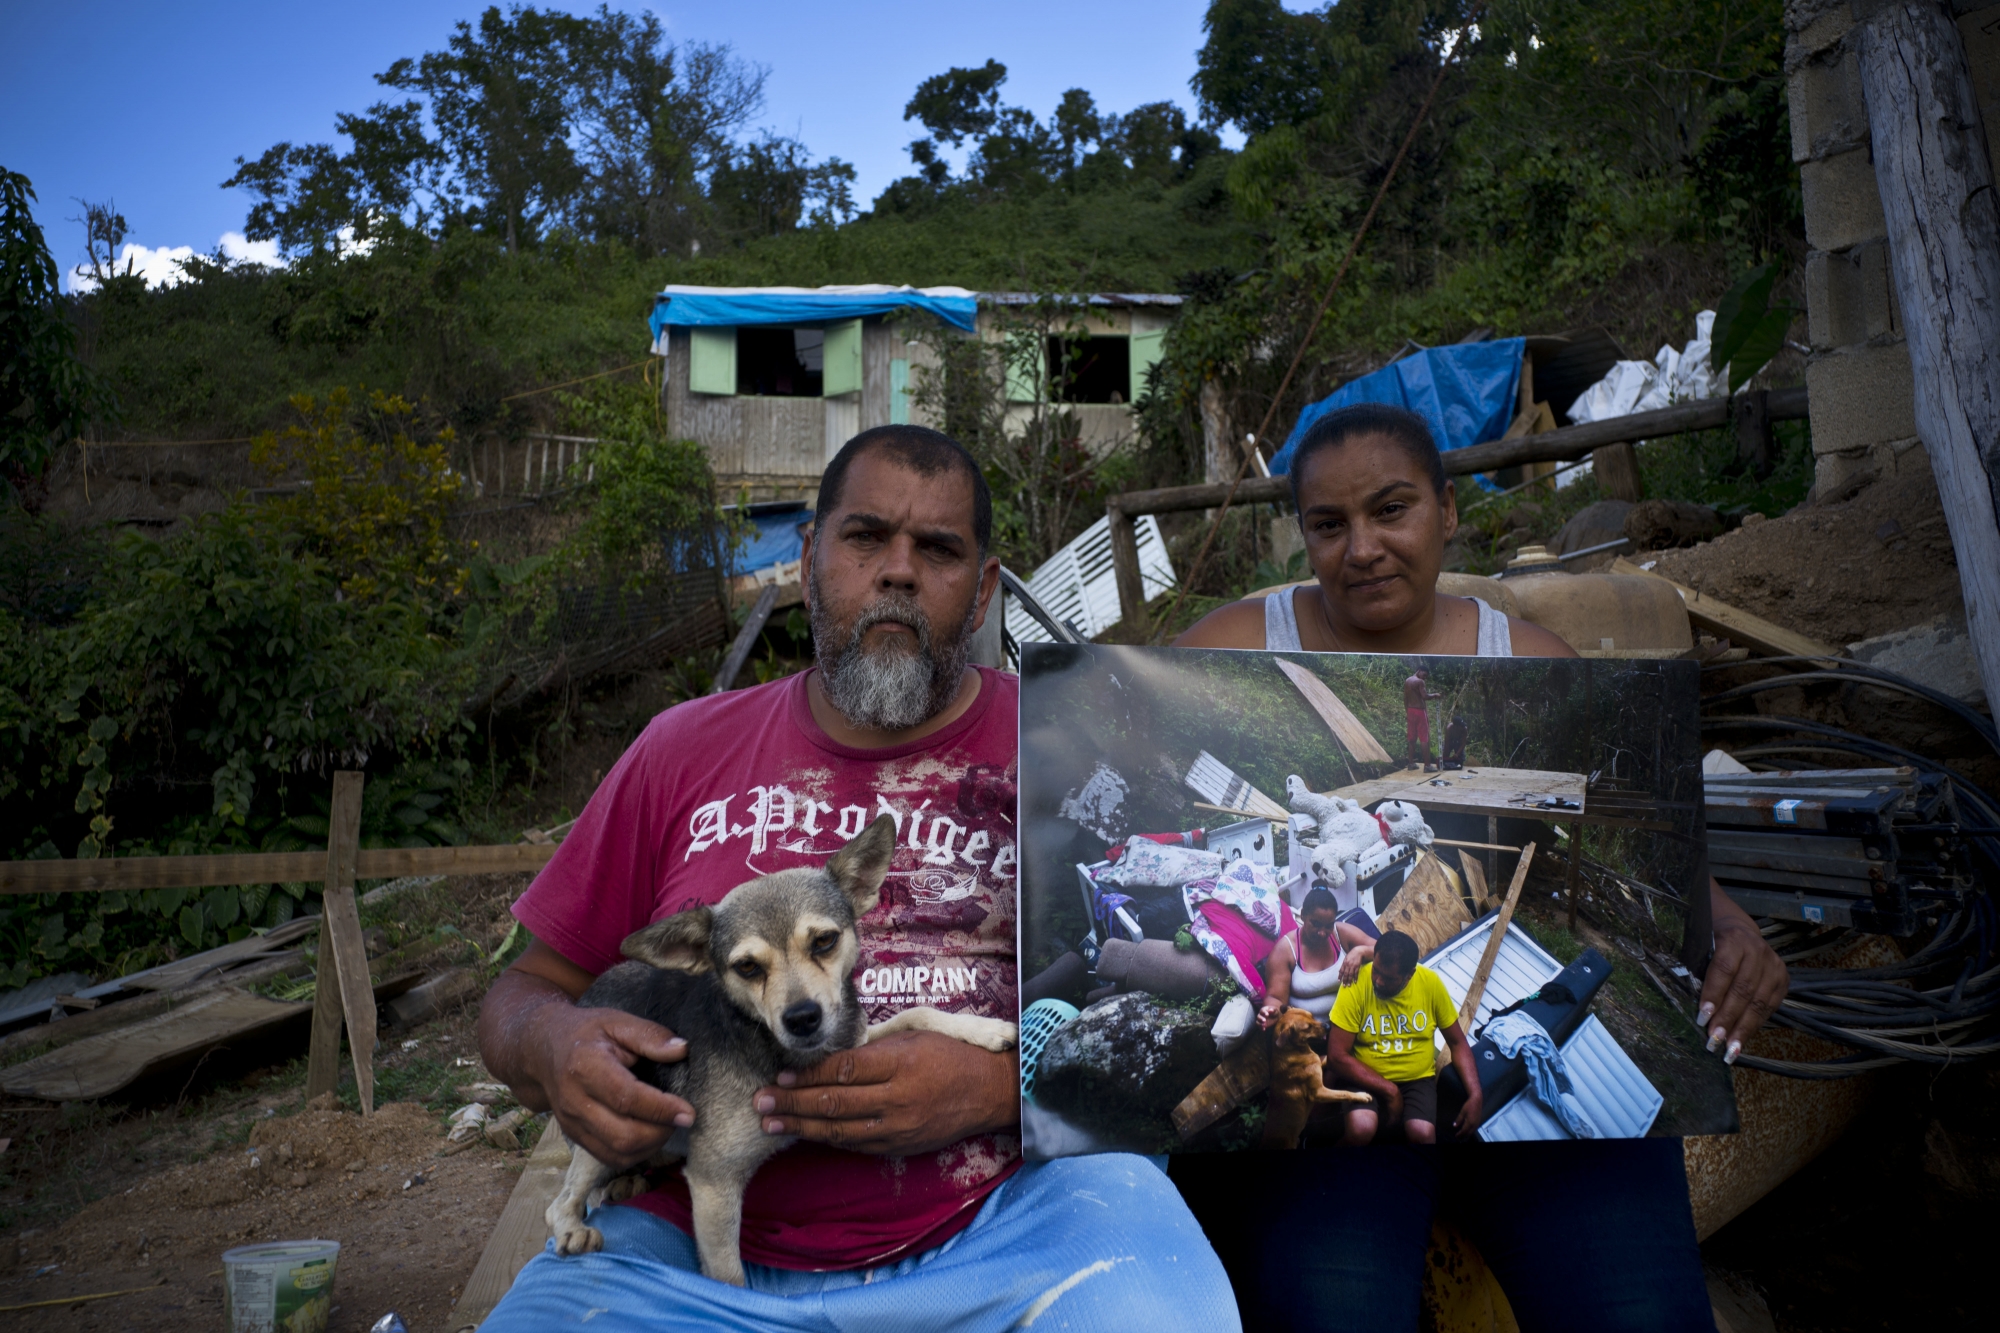 William Fontan Quintero and his wife Yadira Sostre pose with a printed photo of them taken on Sept. 30, 2017 when they sat amid the rubble of their home that was destroyed by Hurricane Maria, at the same spot where they rebuilt their home, behind, in the San Lorenzo neighborhood of Morovis, Puerto Rico, May 29, 2018. The couple says FEMA rejected their application for financial help but they received $8,000 from family to help them replace their belongings, which they invested in wood to build a small home, behind, where they live with their two children who are university students. The roof is plastic tarp while they wait for their FEMA application to be approved so they can finish rebuilding. "We don't have time to build anything safe without help," said Quintero. (AP Photo/Ramon Espinosa) Puerto Rico Hurricane Then and Now Photo Essay